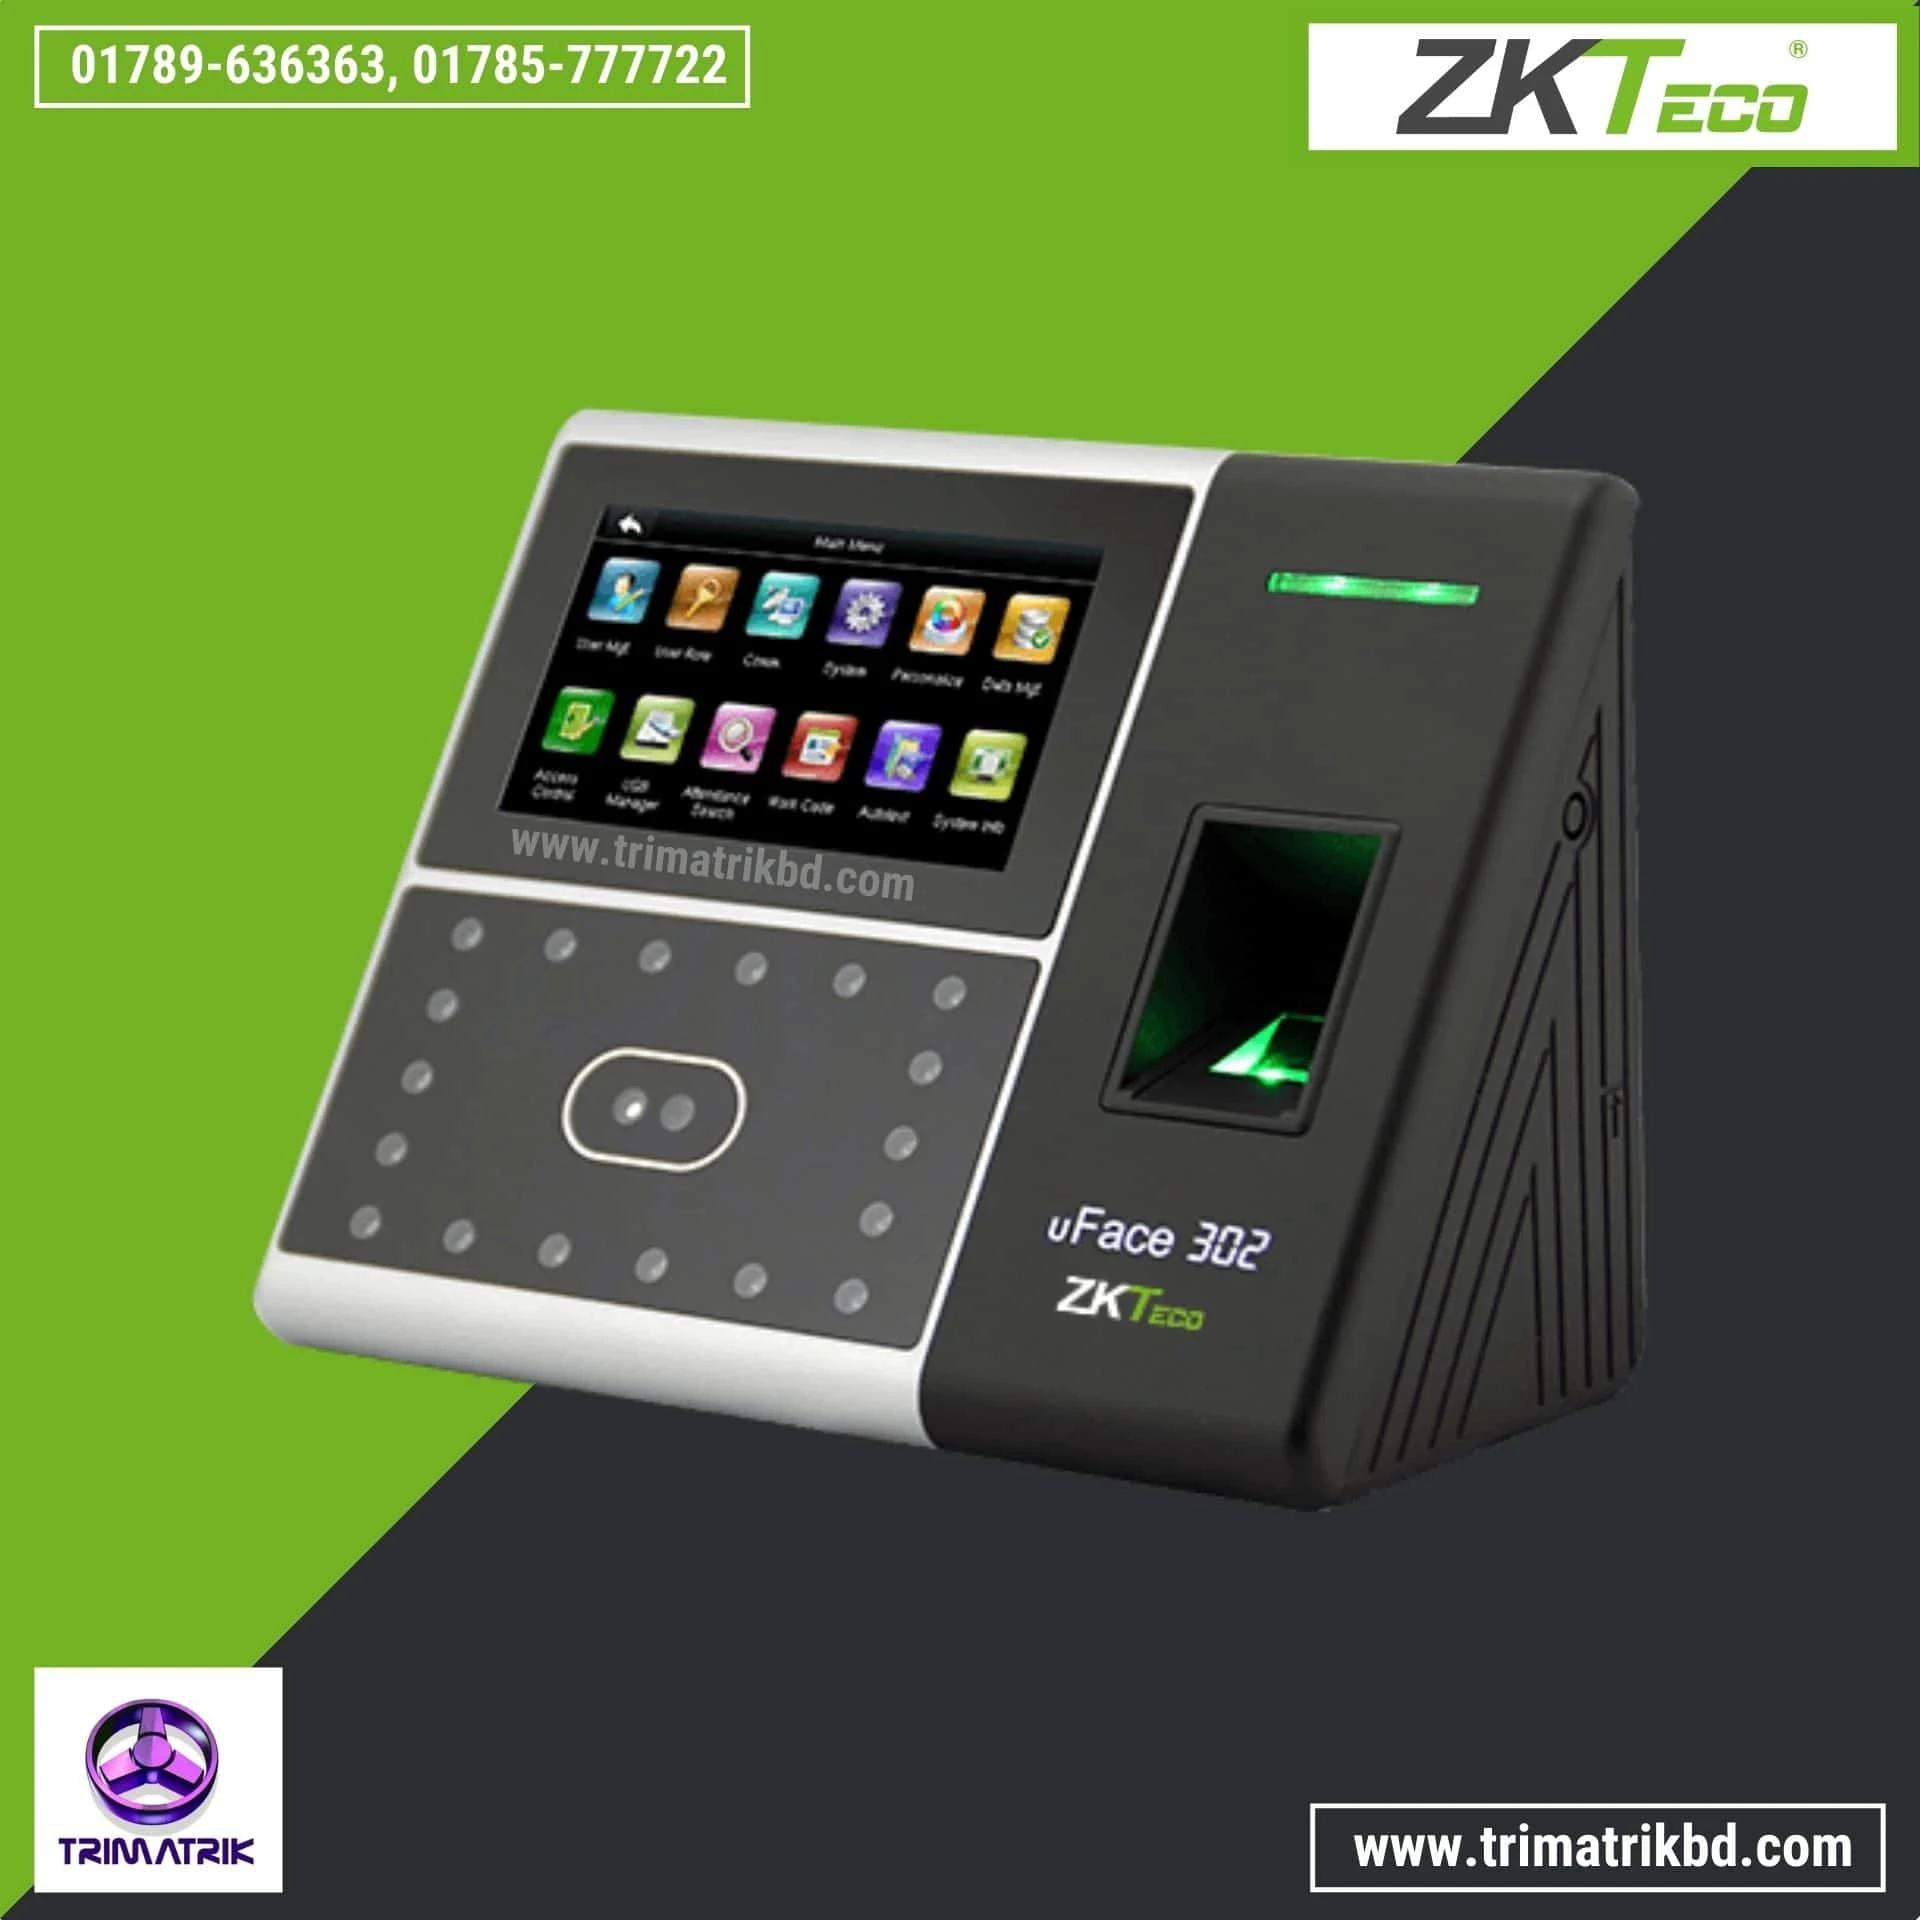 ZKTeco uFace302 (Multi-Biometric) Face Detection Time Attendance and Access Control Terminal